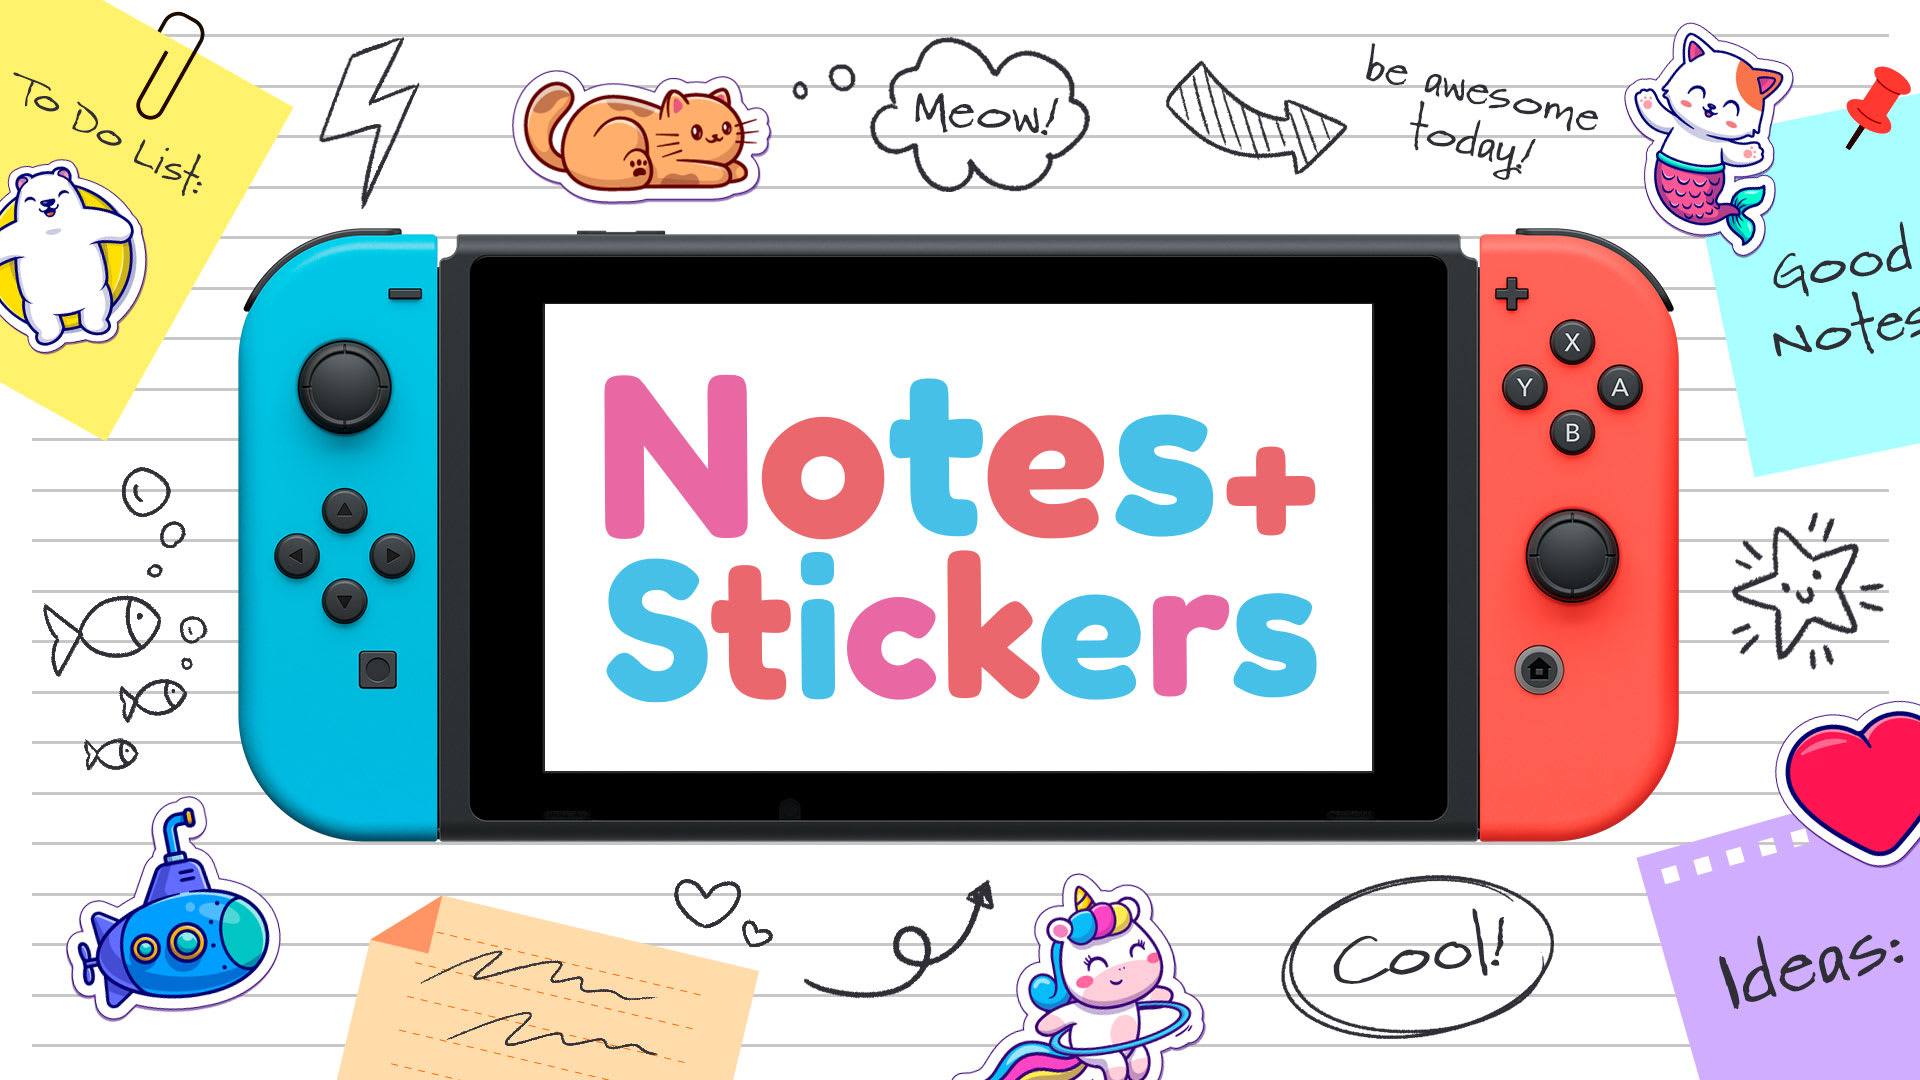 Notes + Stickers